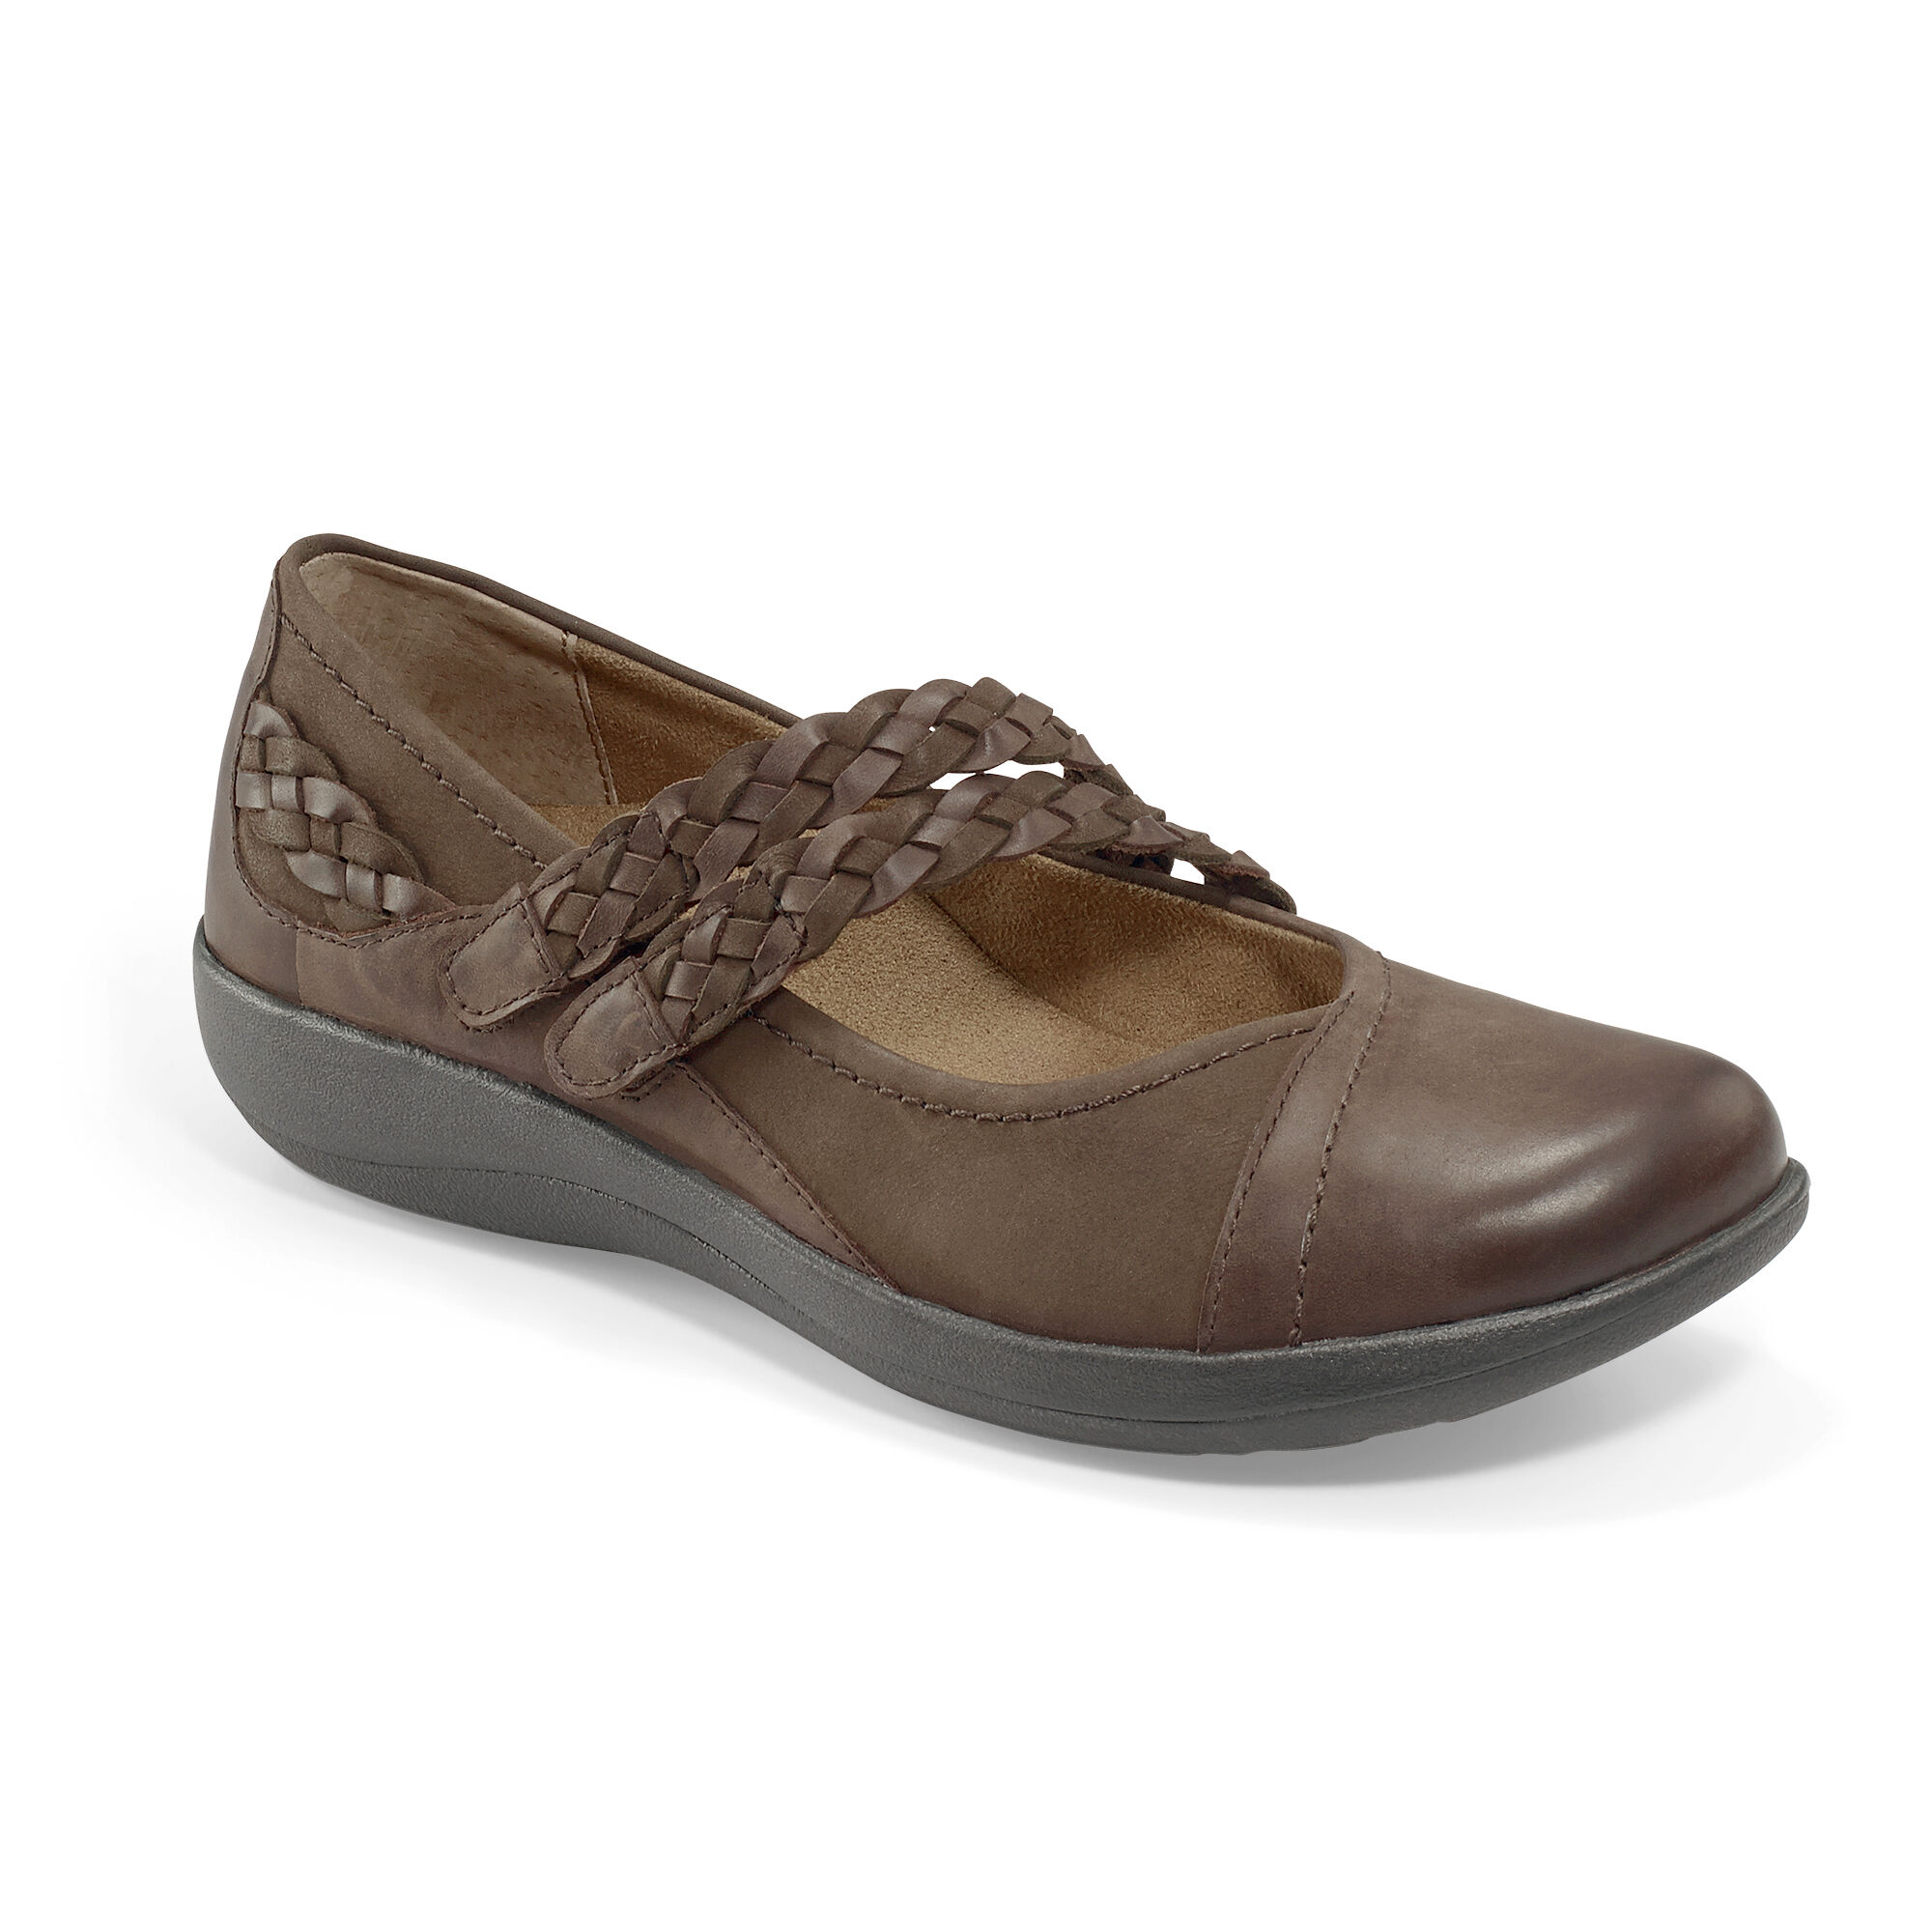 aetrex mary jane shoes on sale